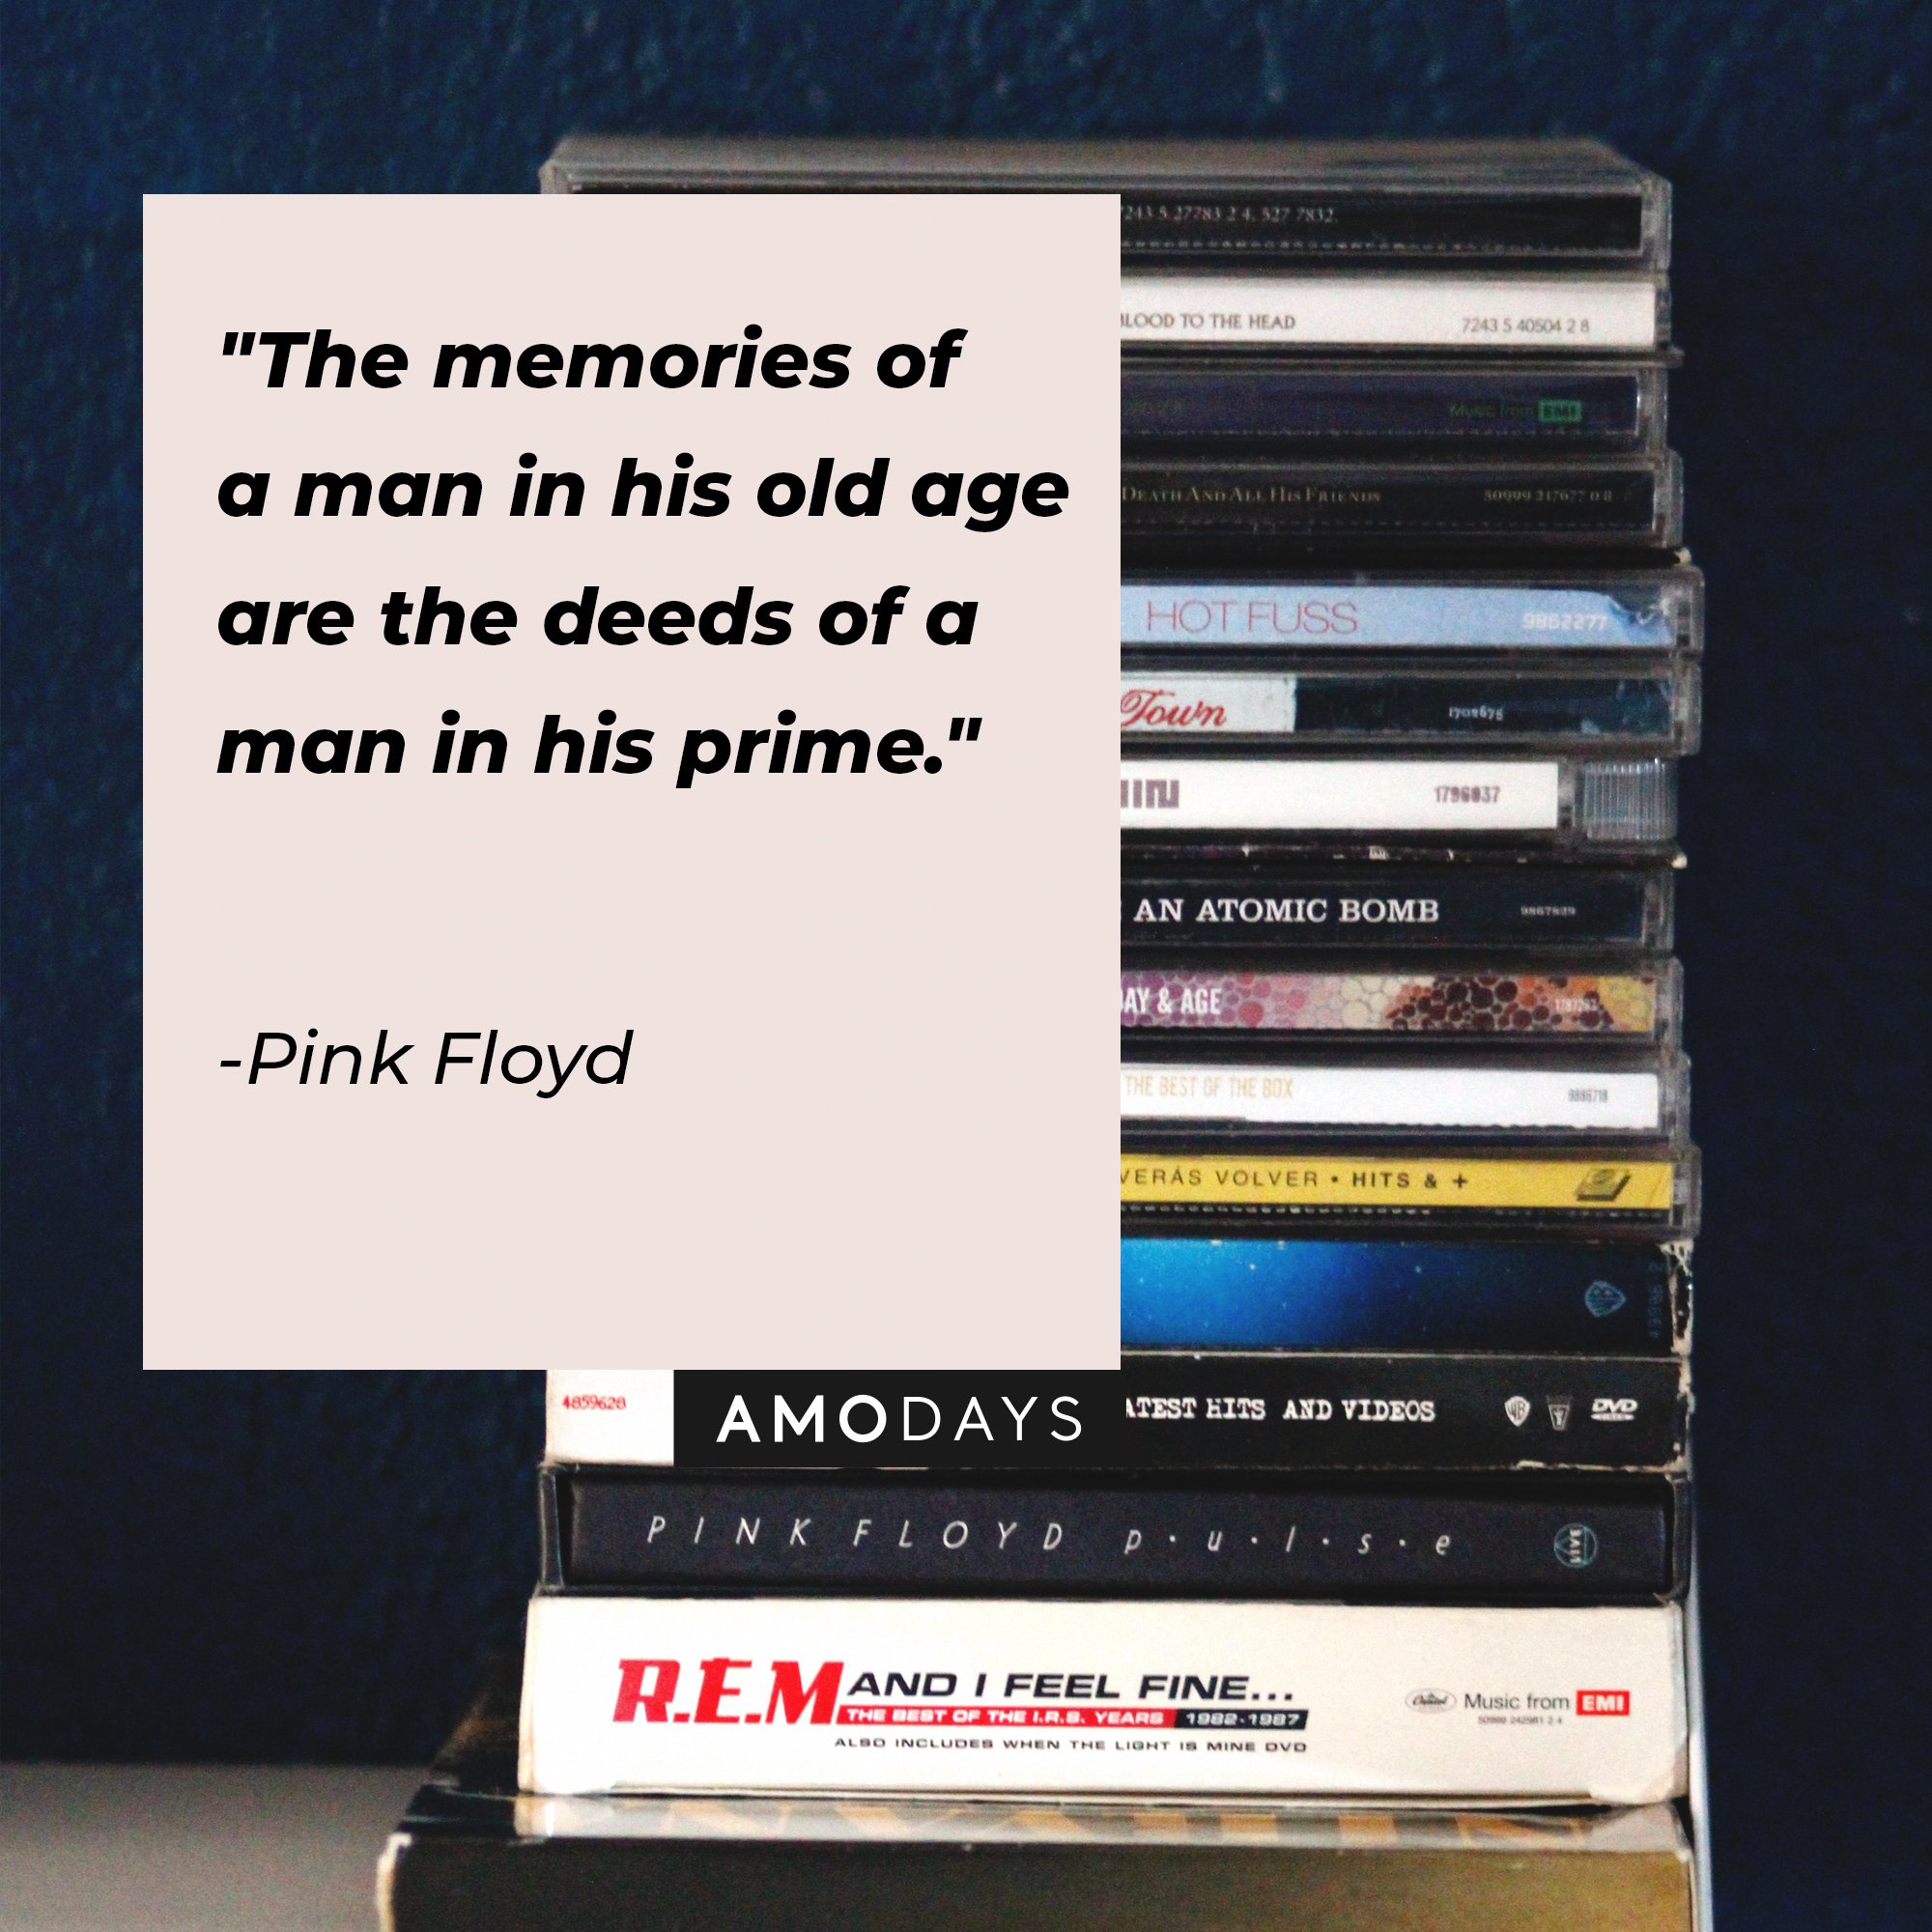 Pink Floyd's quote: "The memories of a man in his old age are the deeds of a man in his prime." | Image: AmoDays